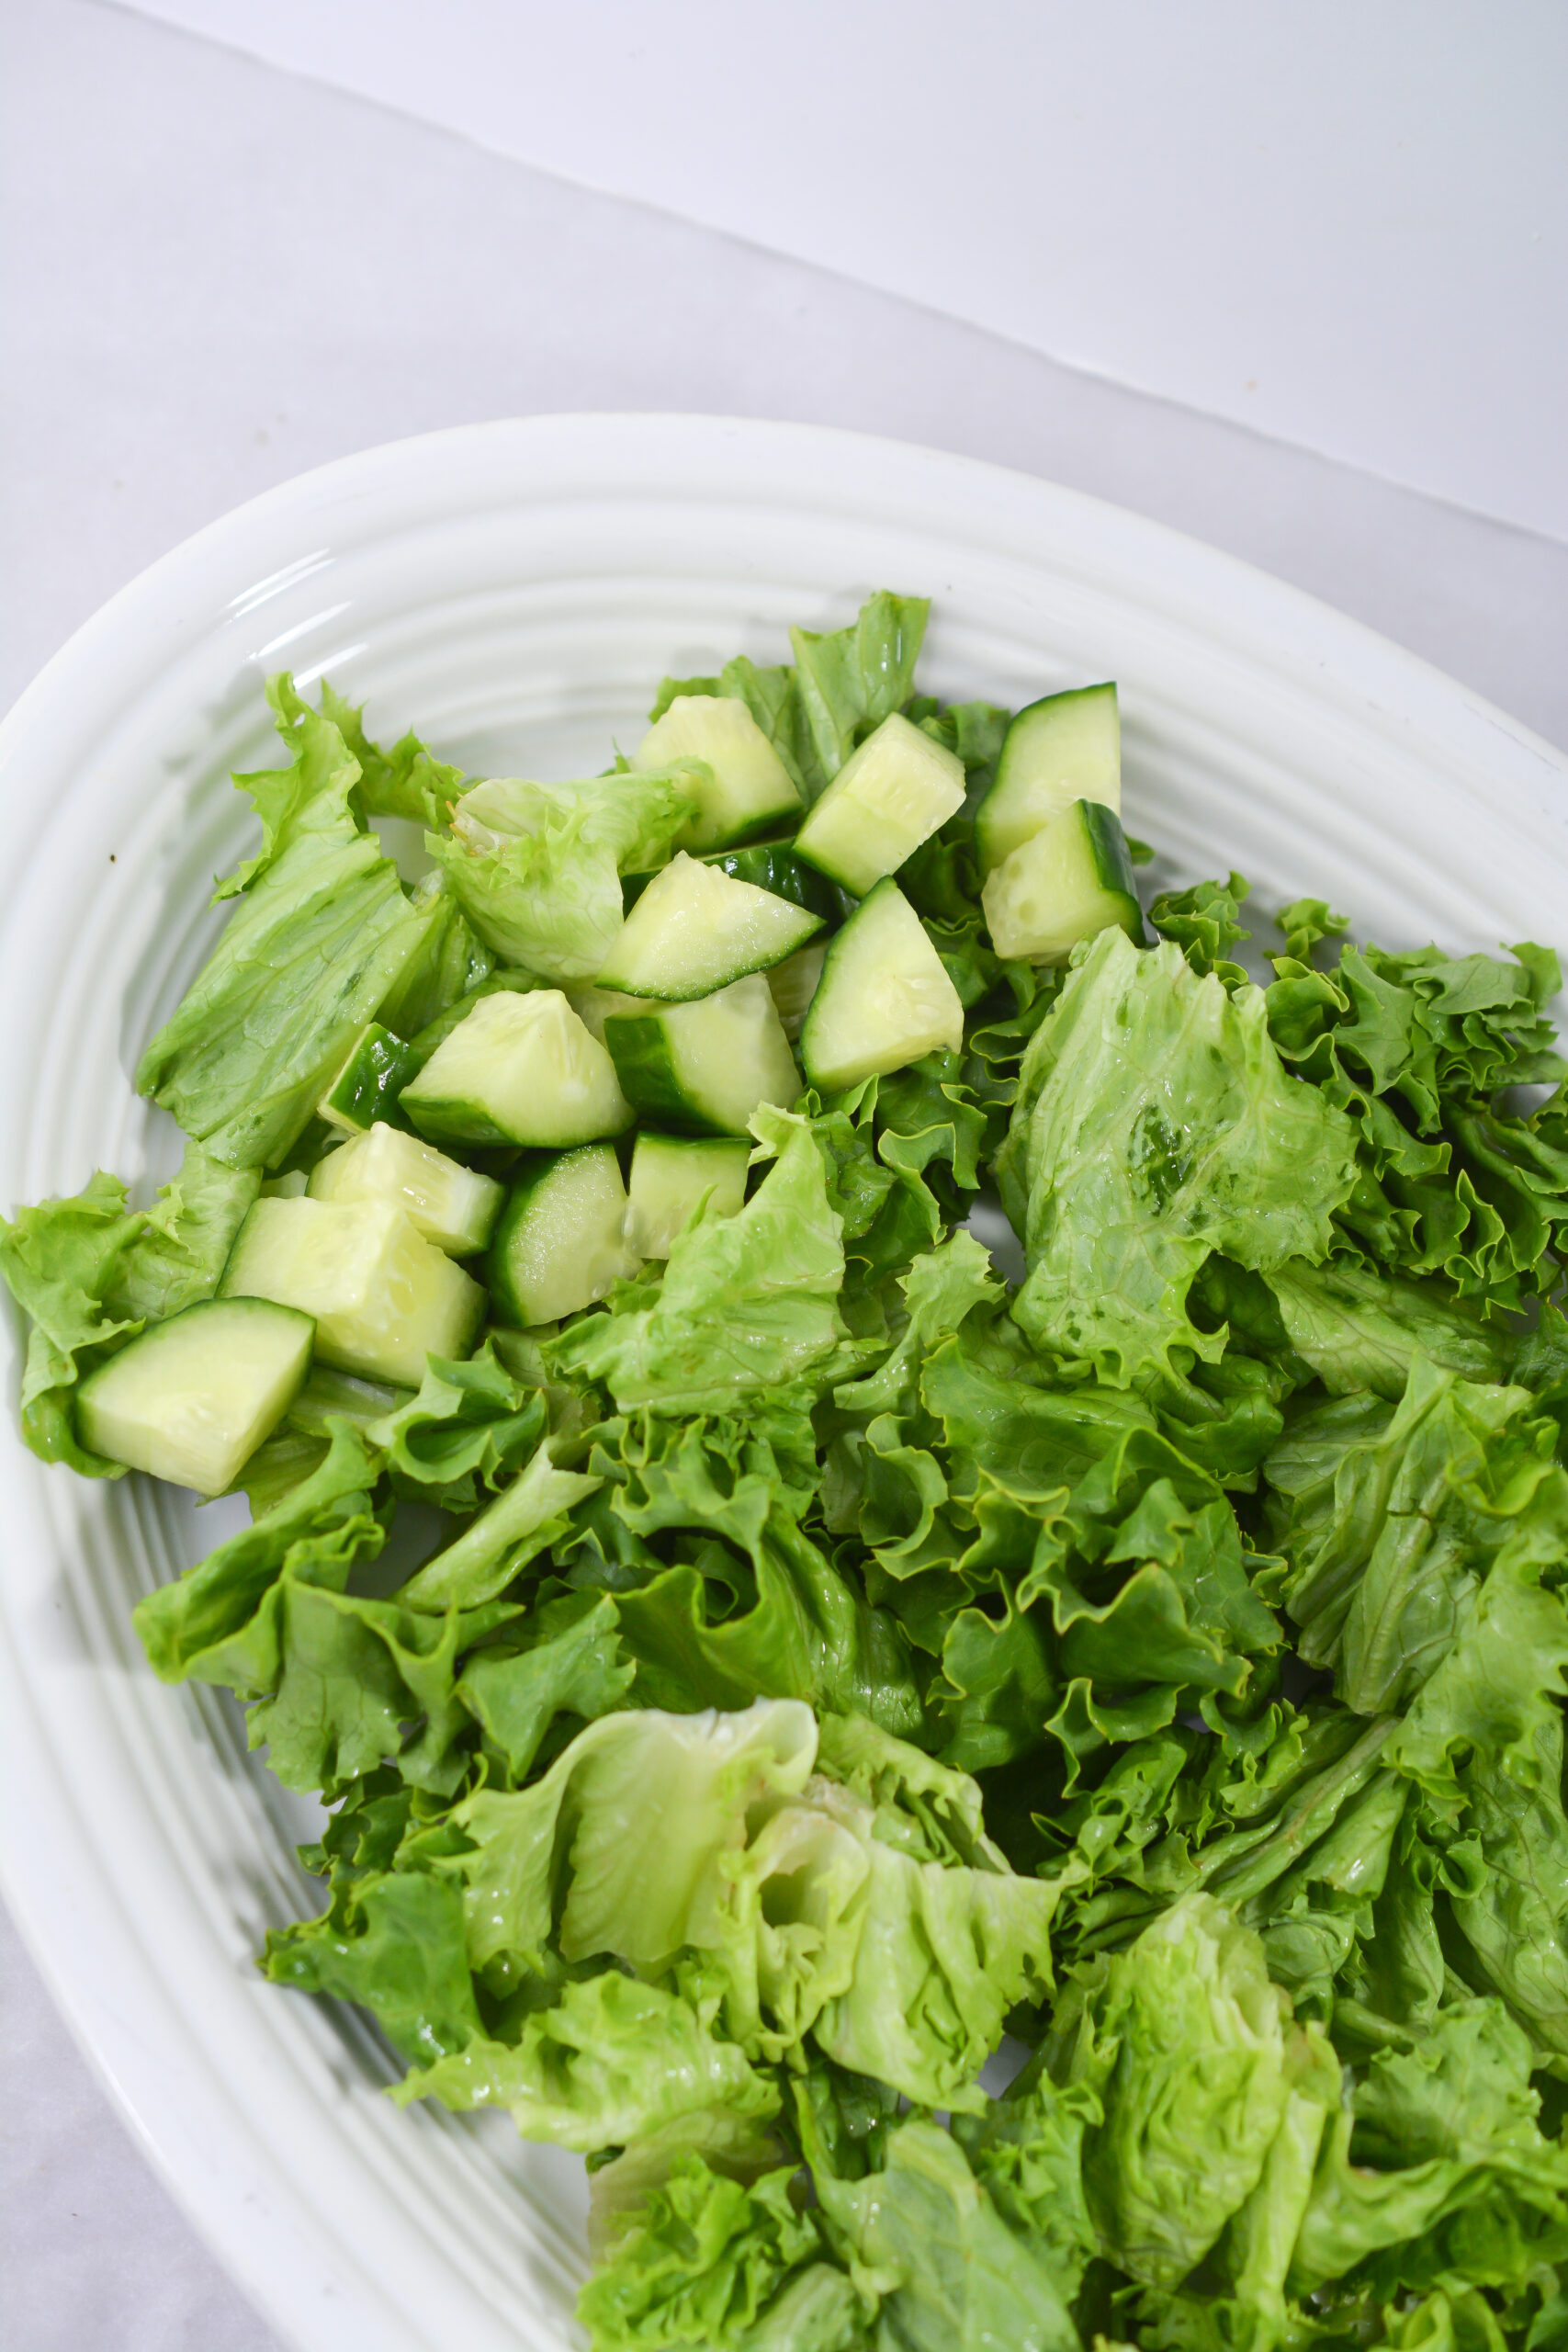 Chopped lettuce and cucumbers on a plate.